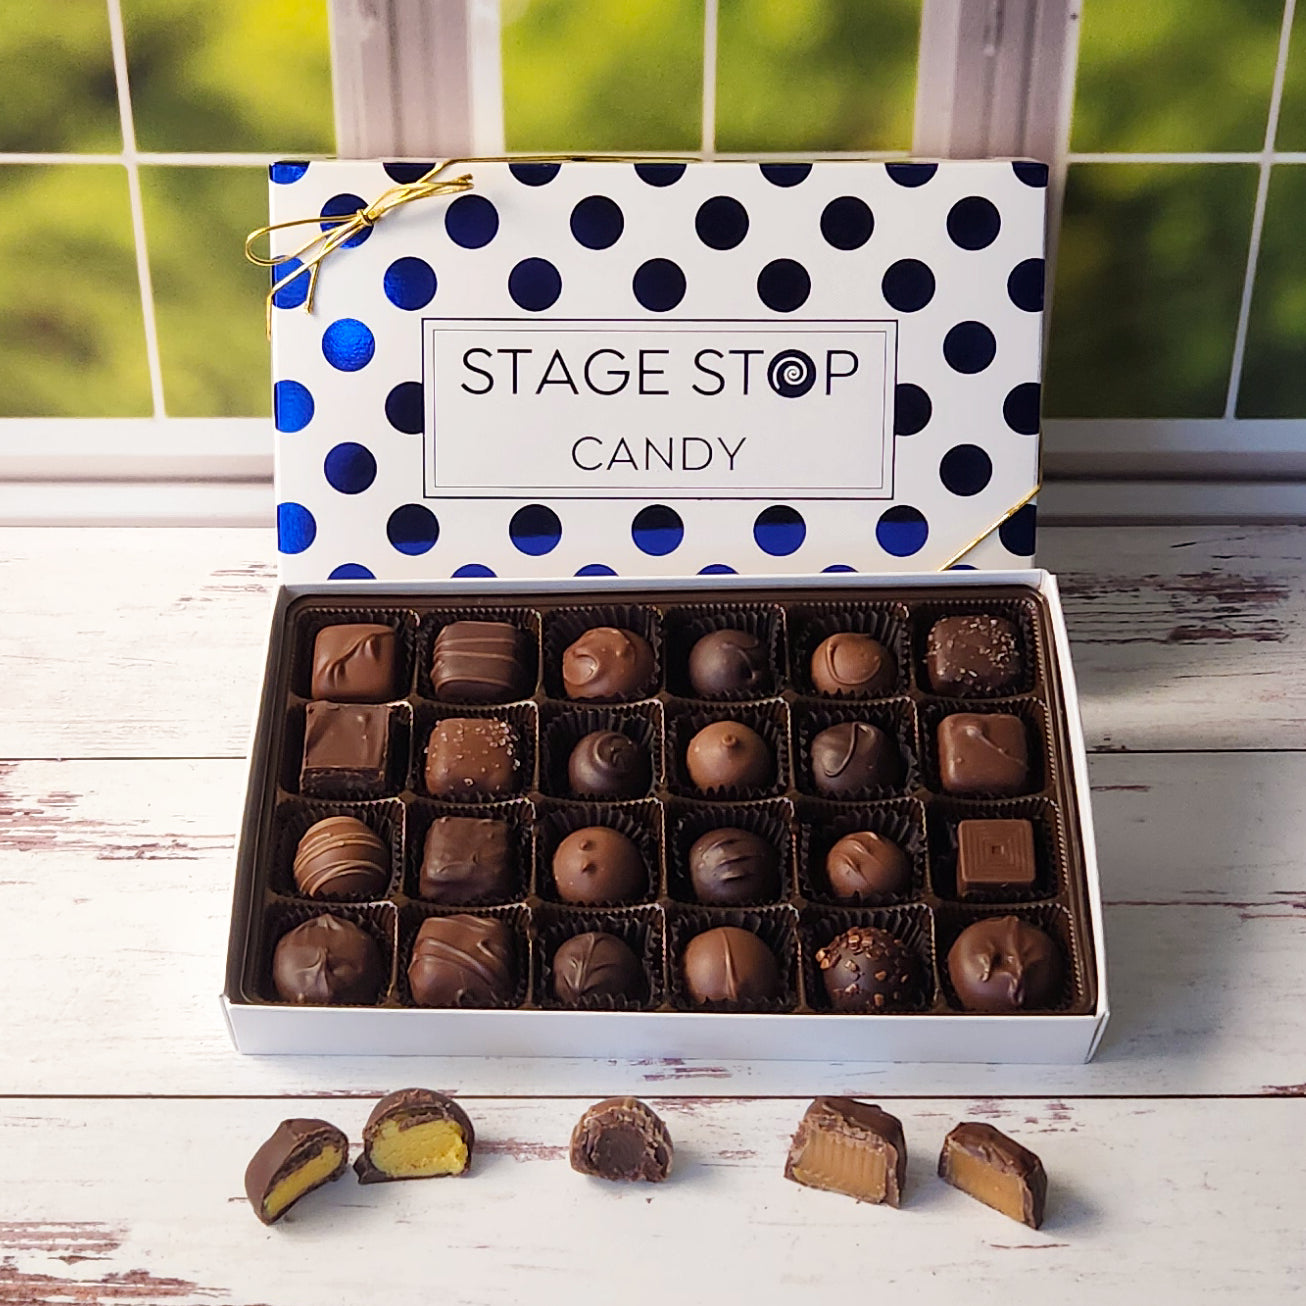 24 pieces of our most popular chocolate candies. This medium size box is perfect for sharing. Each Cream, Caramel, Truffle or meltaway is dipped in either Milk Chocolate or Dark Chocolate.